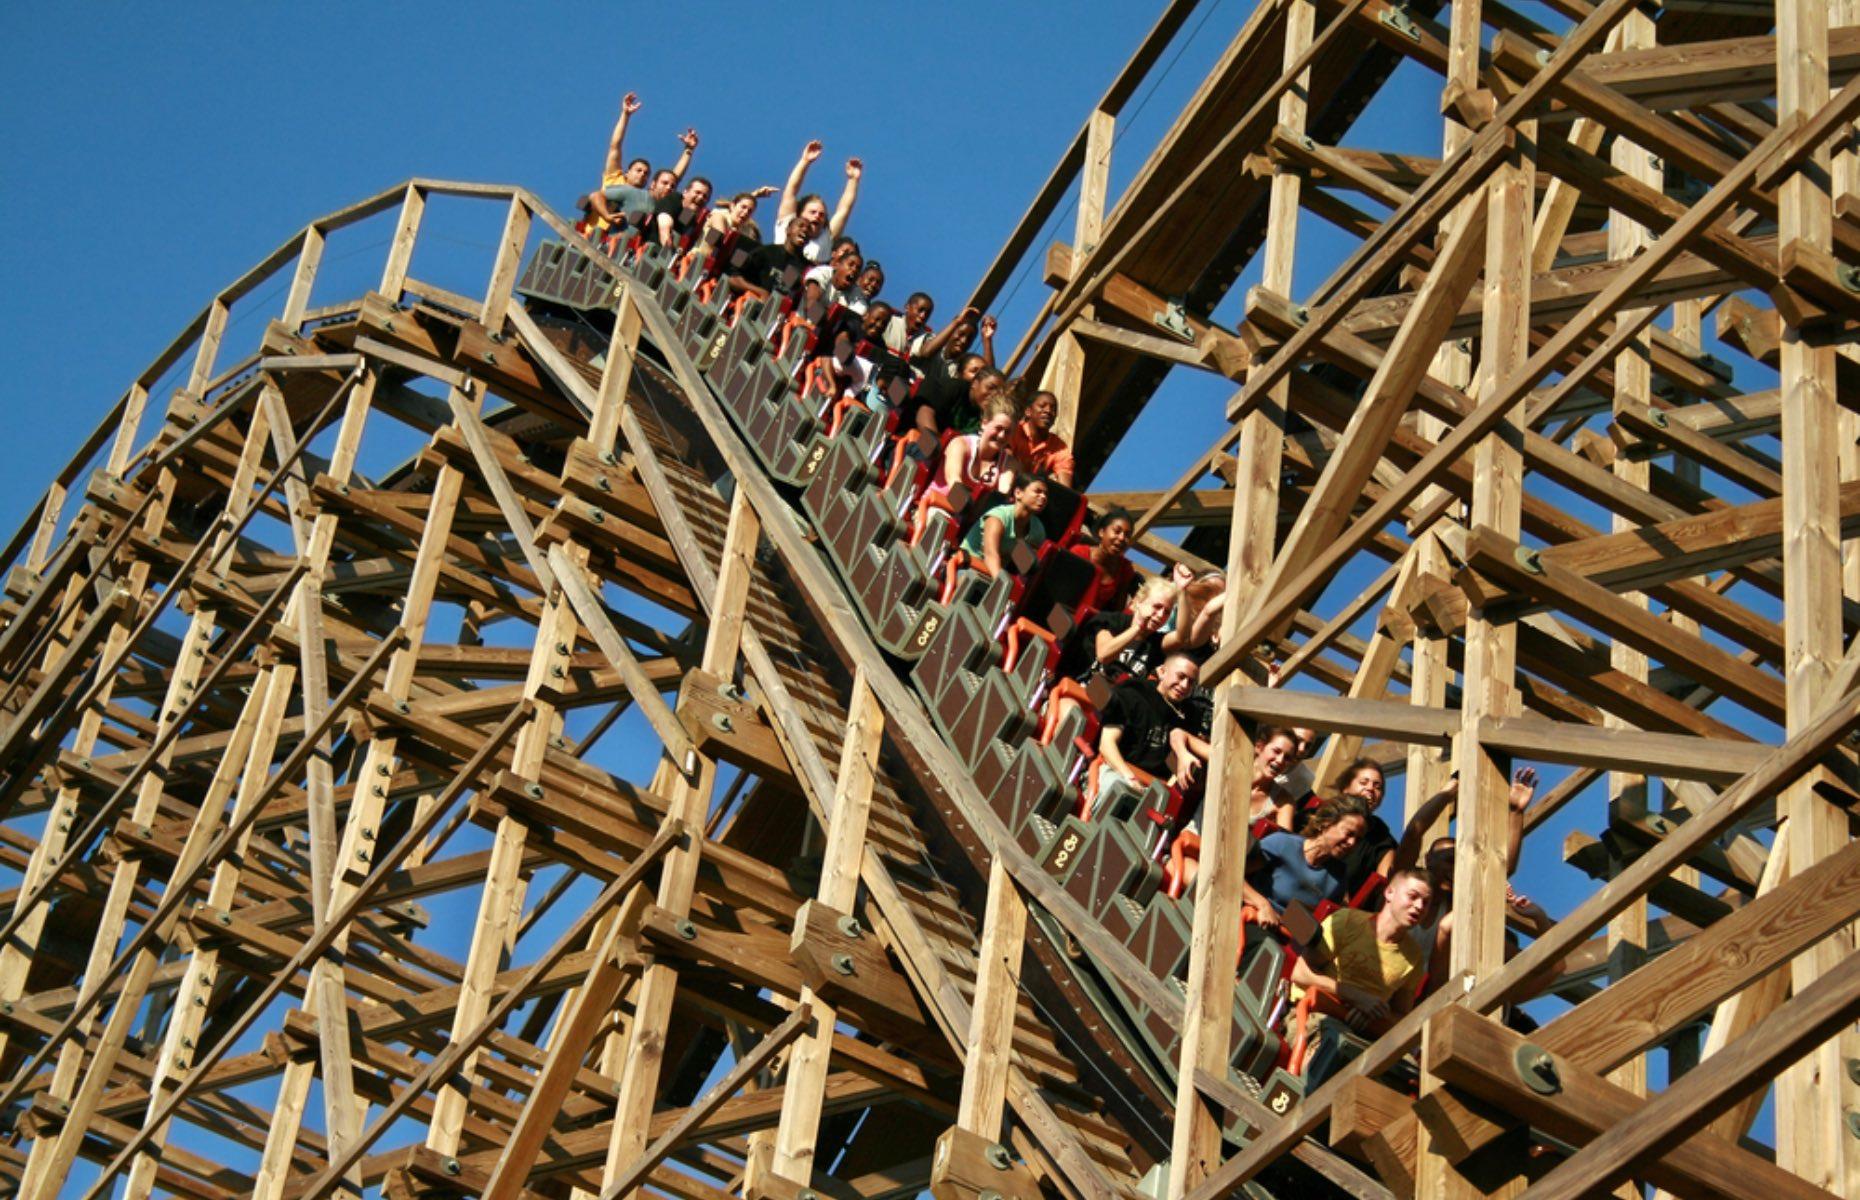 <p>Switchback is the only wooden shuttle roller coaster in the world, meaning it can go backward and forward. During the quirky ride, the locomotive-themed trains make two journeys through an old grocery store, before completing the circuit backwards.</p>  <p>It also holds the record for the steepest angled drop of all wooden roller coasters at 87°.</p>